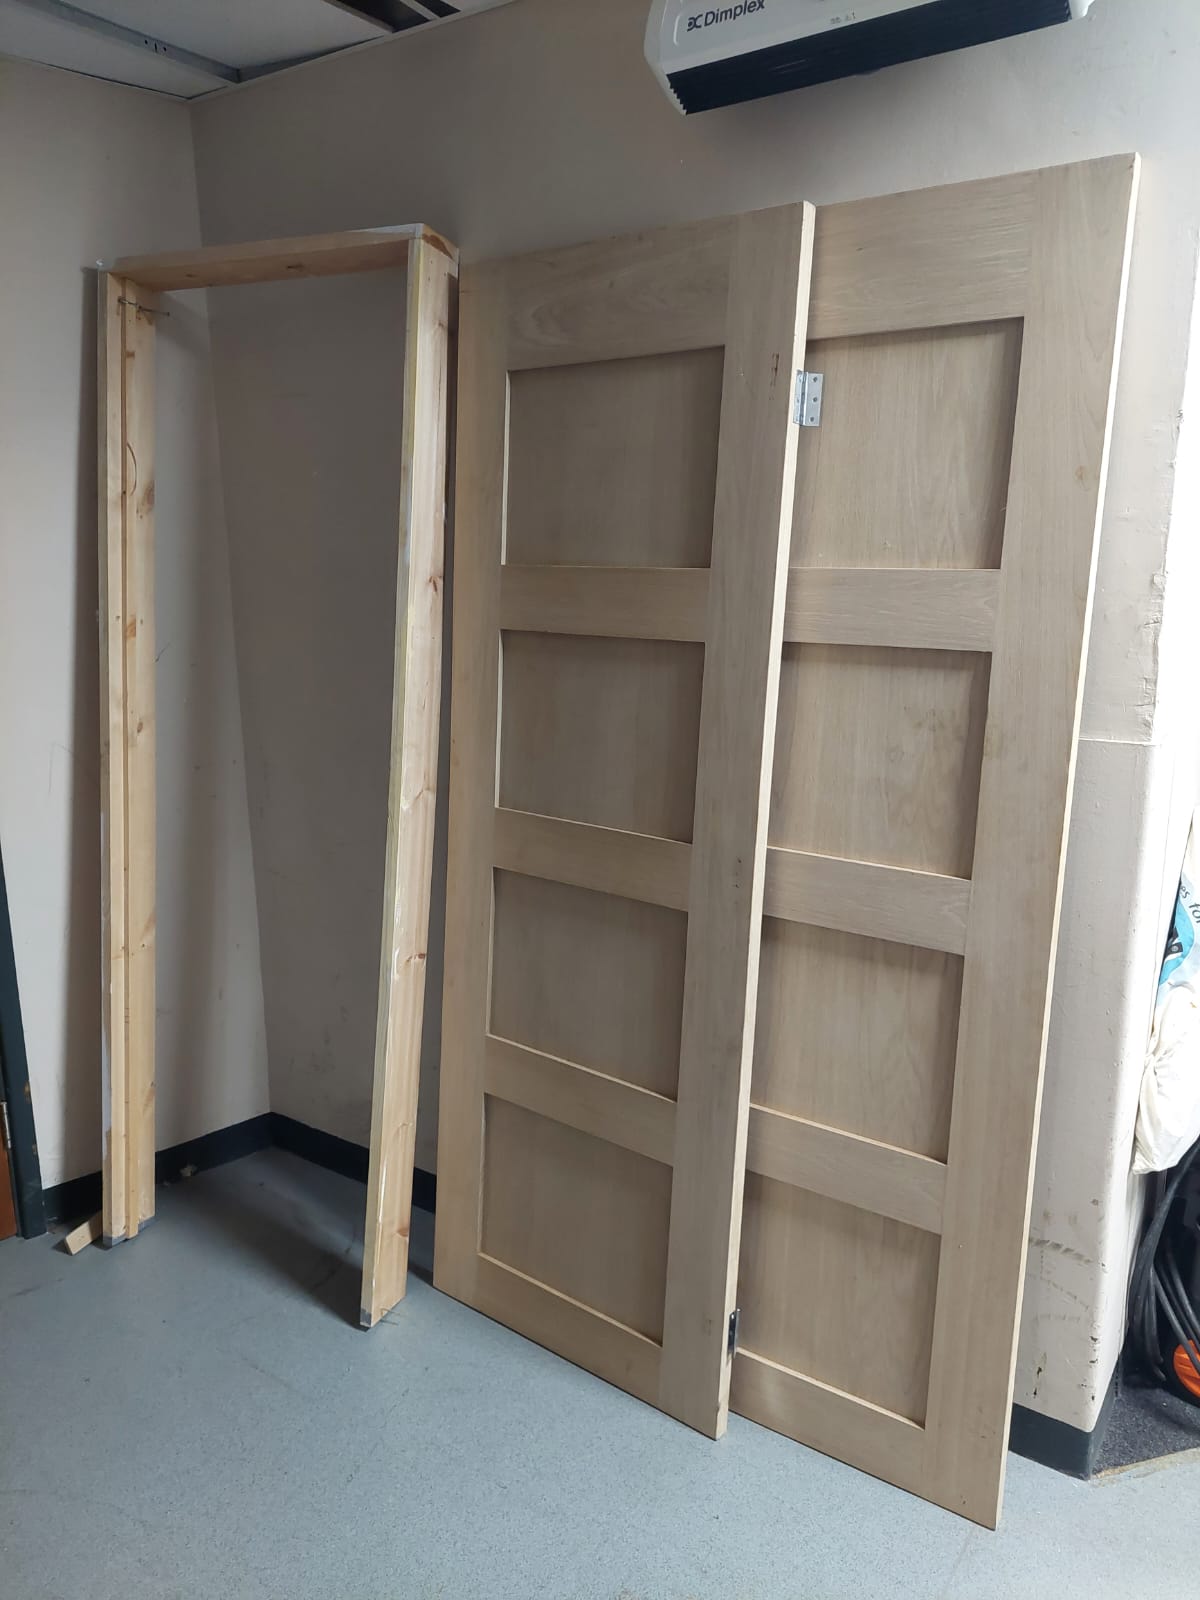 Two oak internal doors together with a frame.